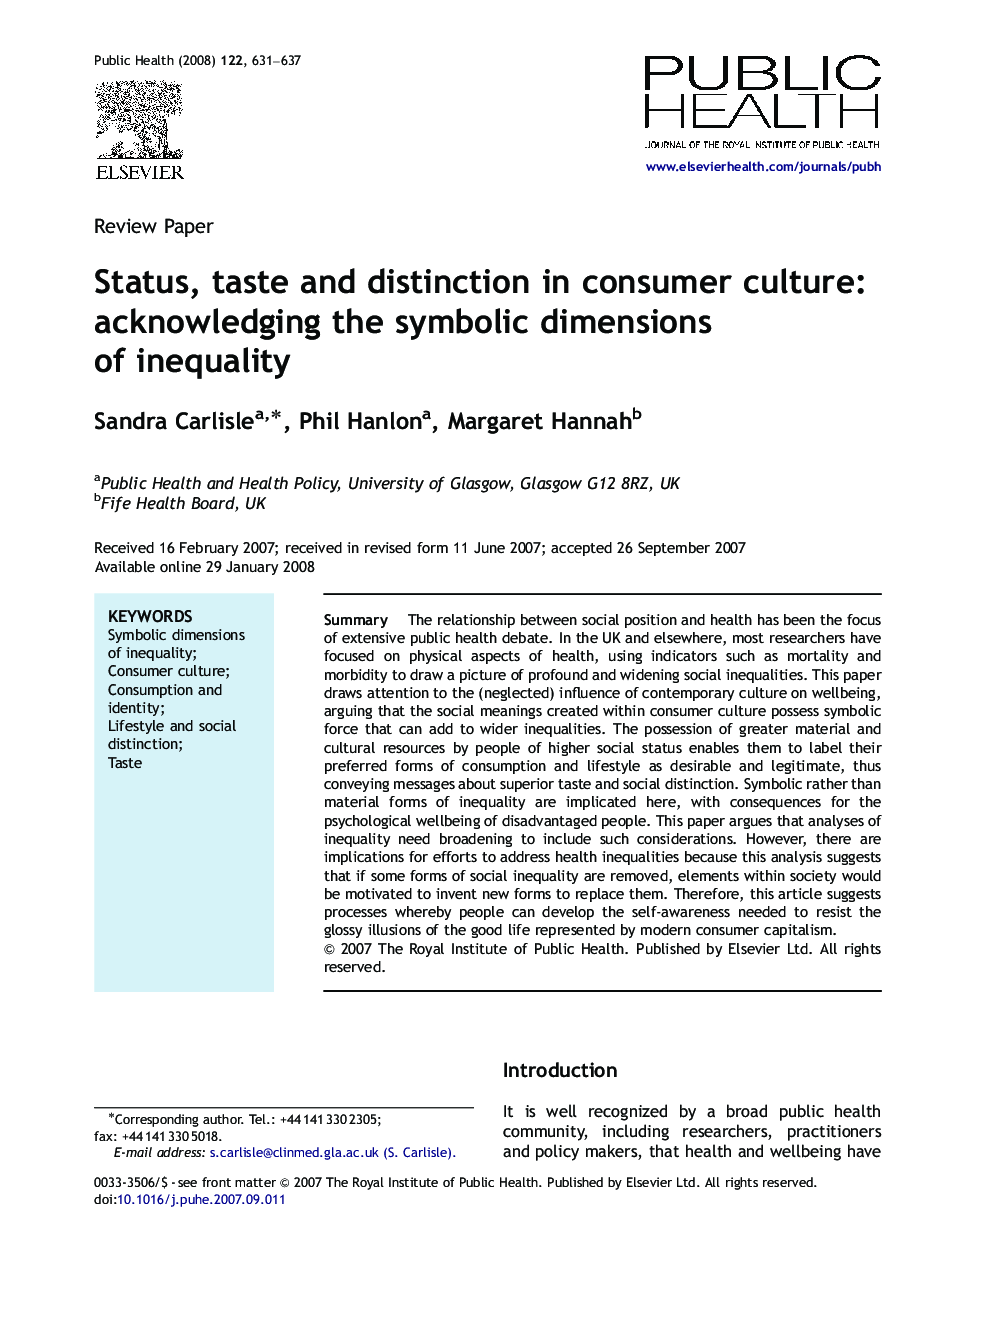 Status, taste and distinction in consumer culture: acknowledging the symbolic dimensions of inequality